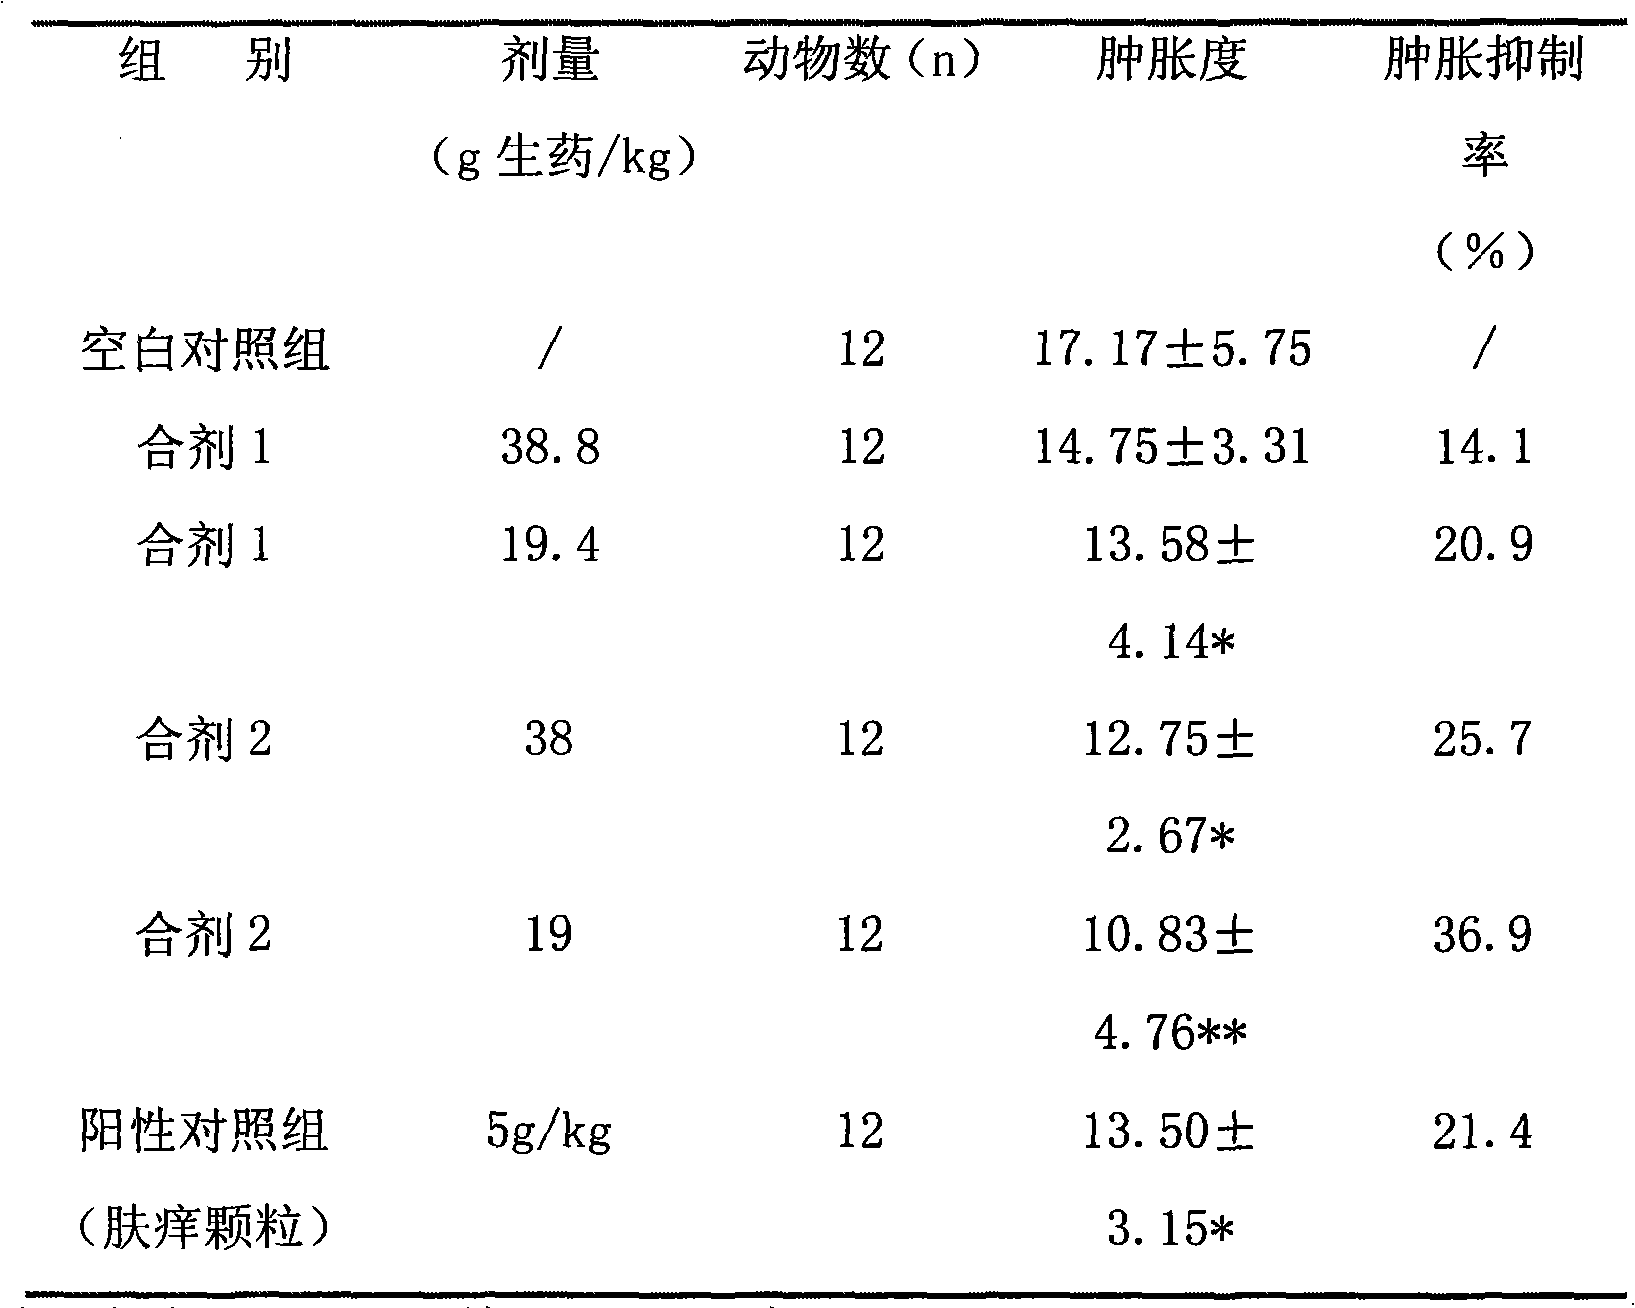 TCM composite for treating skin diseases related to symptoms of blood heat and yang floating and application thereof